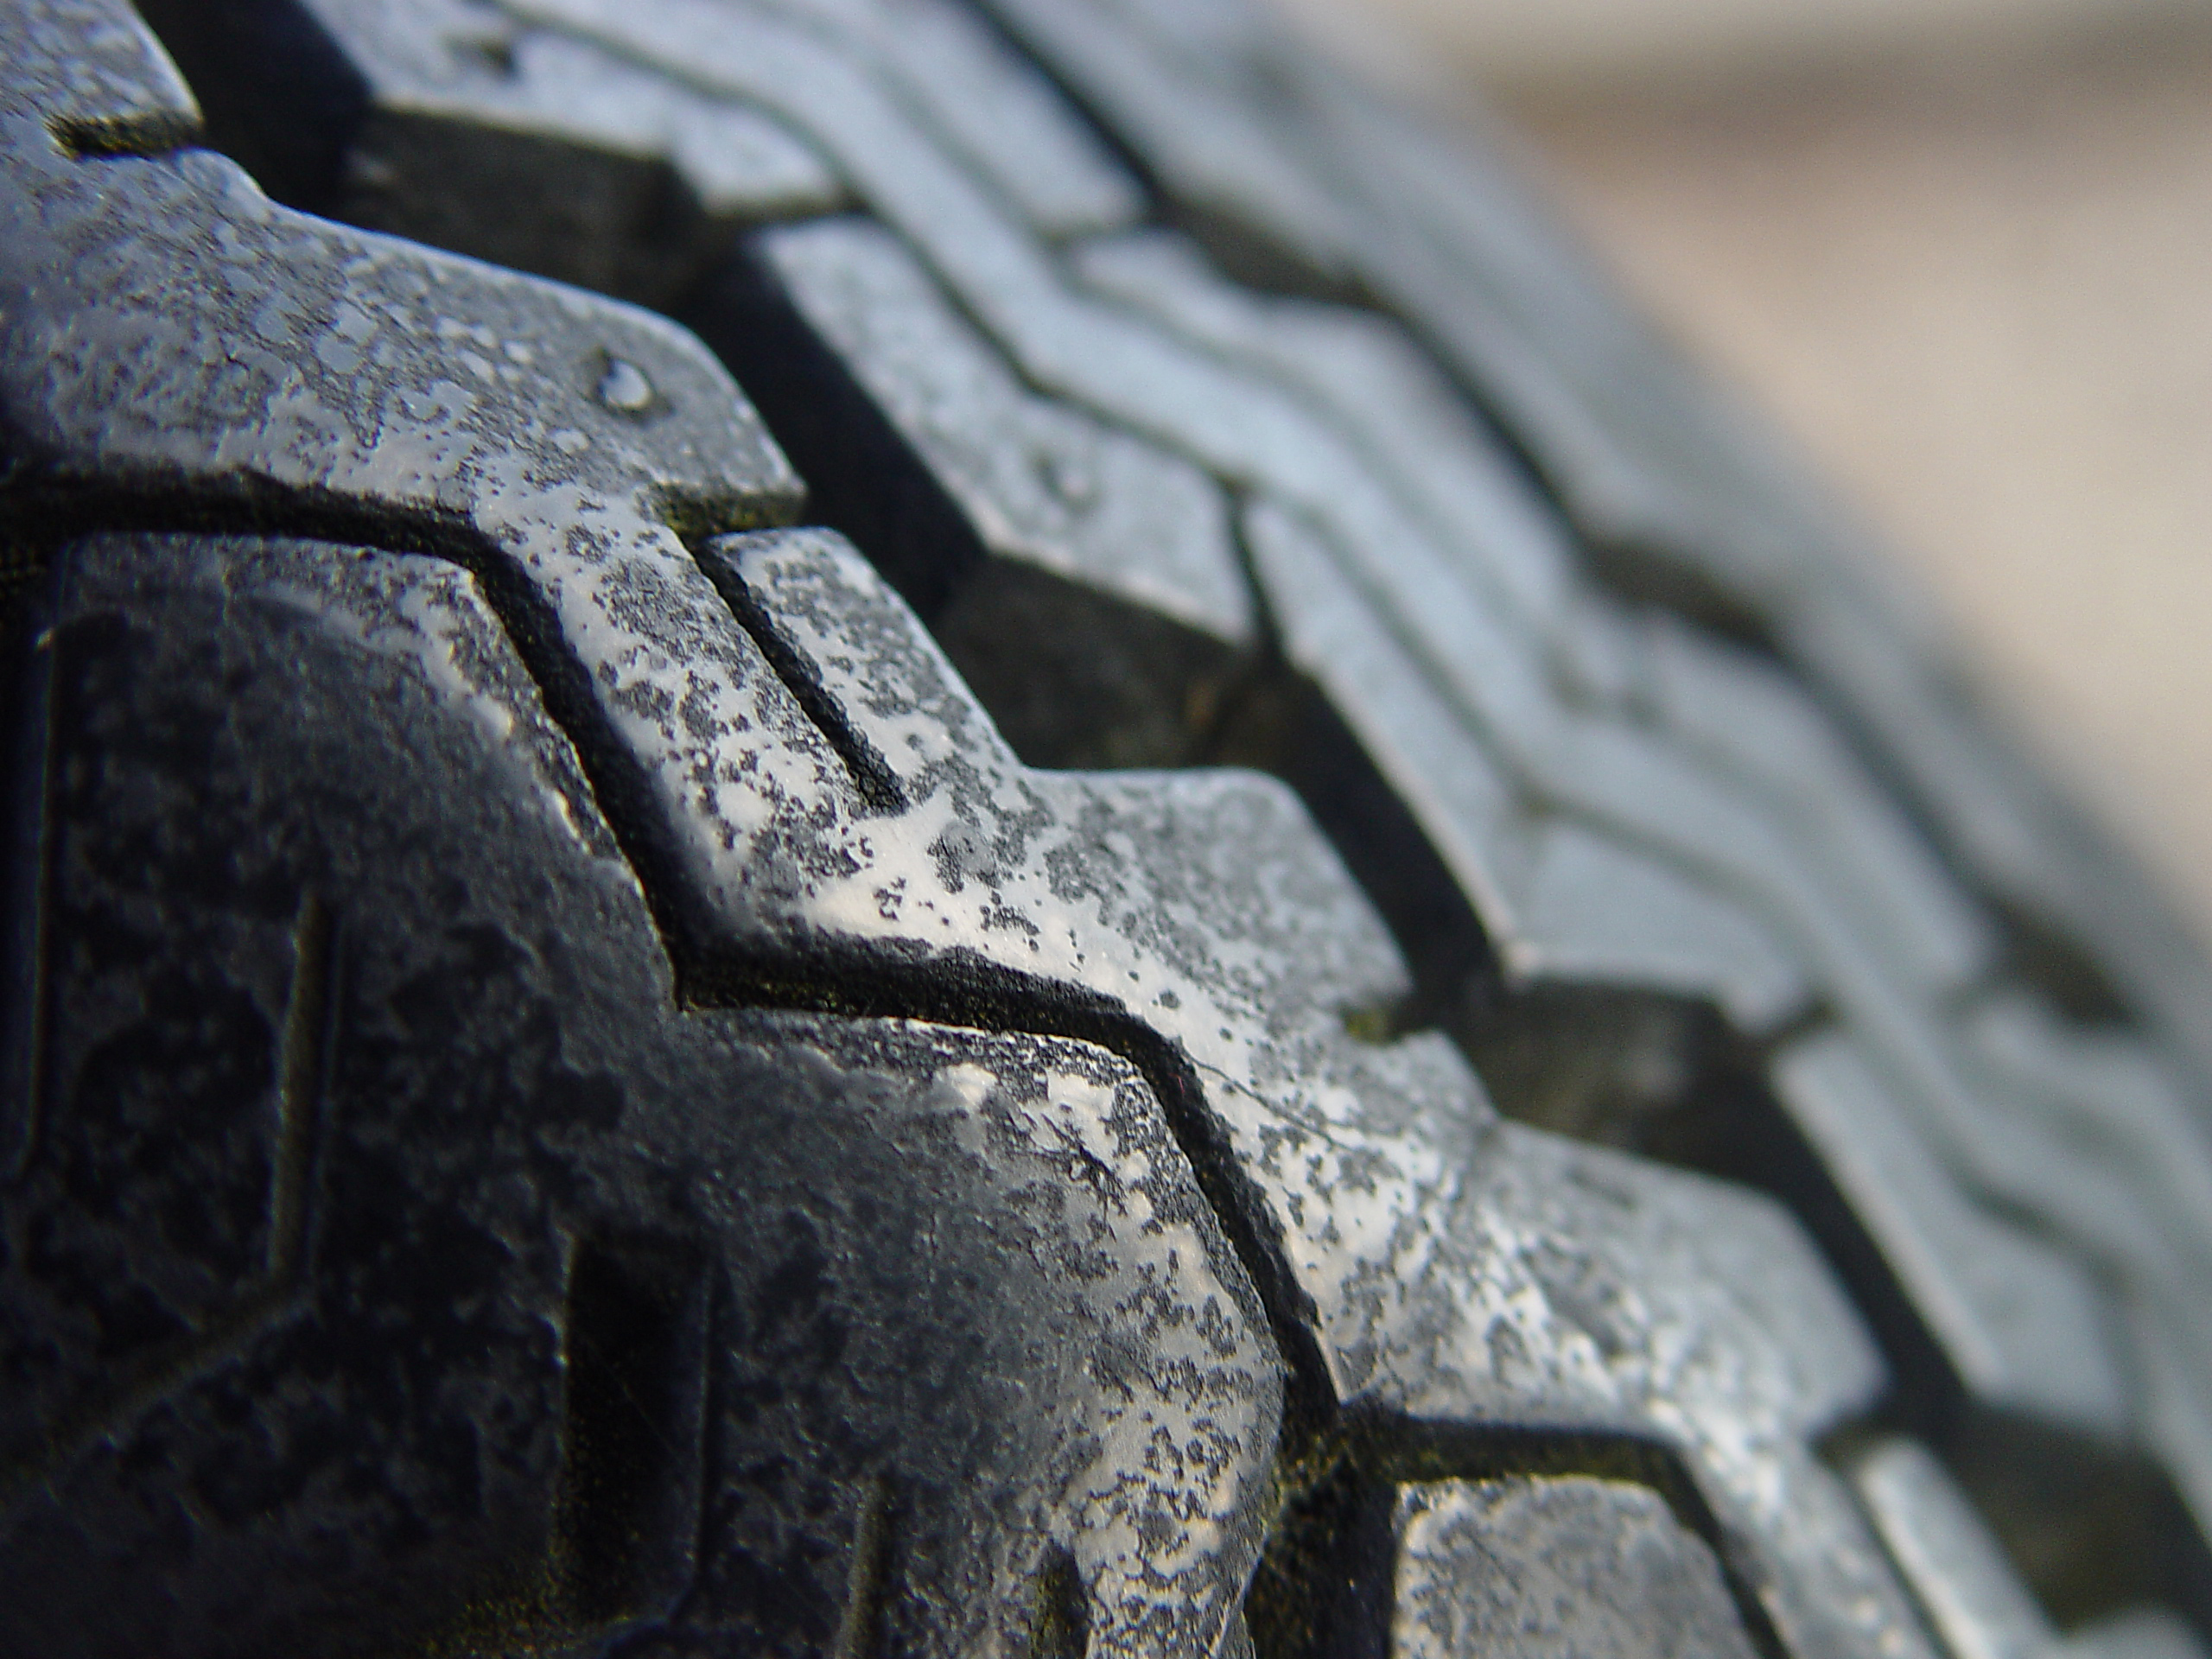 Change to the annual test for free-rolling tyres